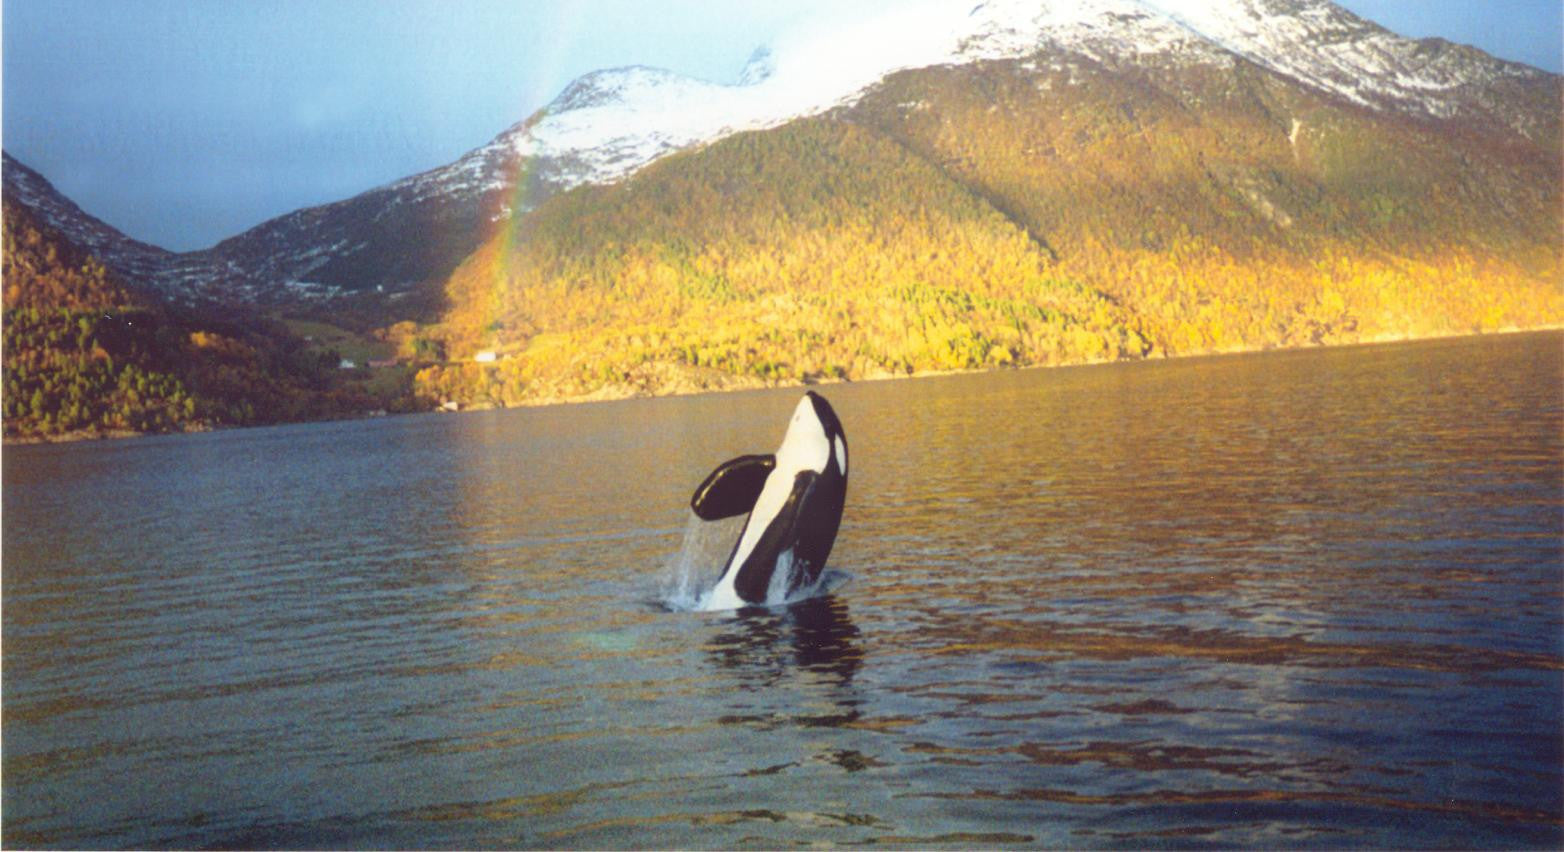 Scene from documentary "Keiko: The Untold Story of the Star of Free Willy"